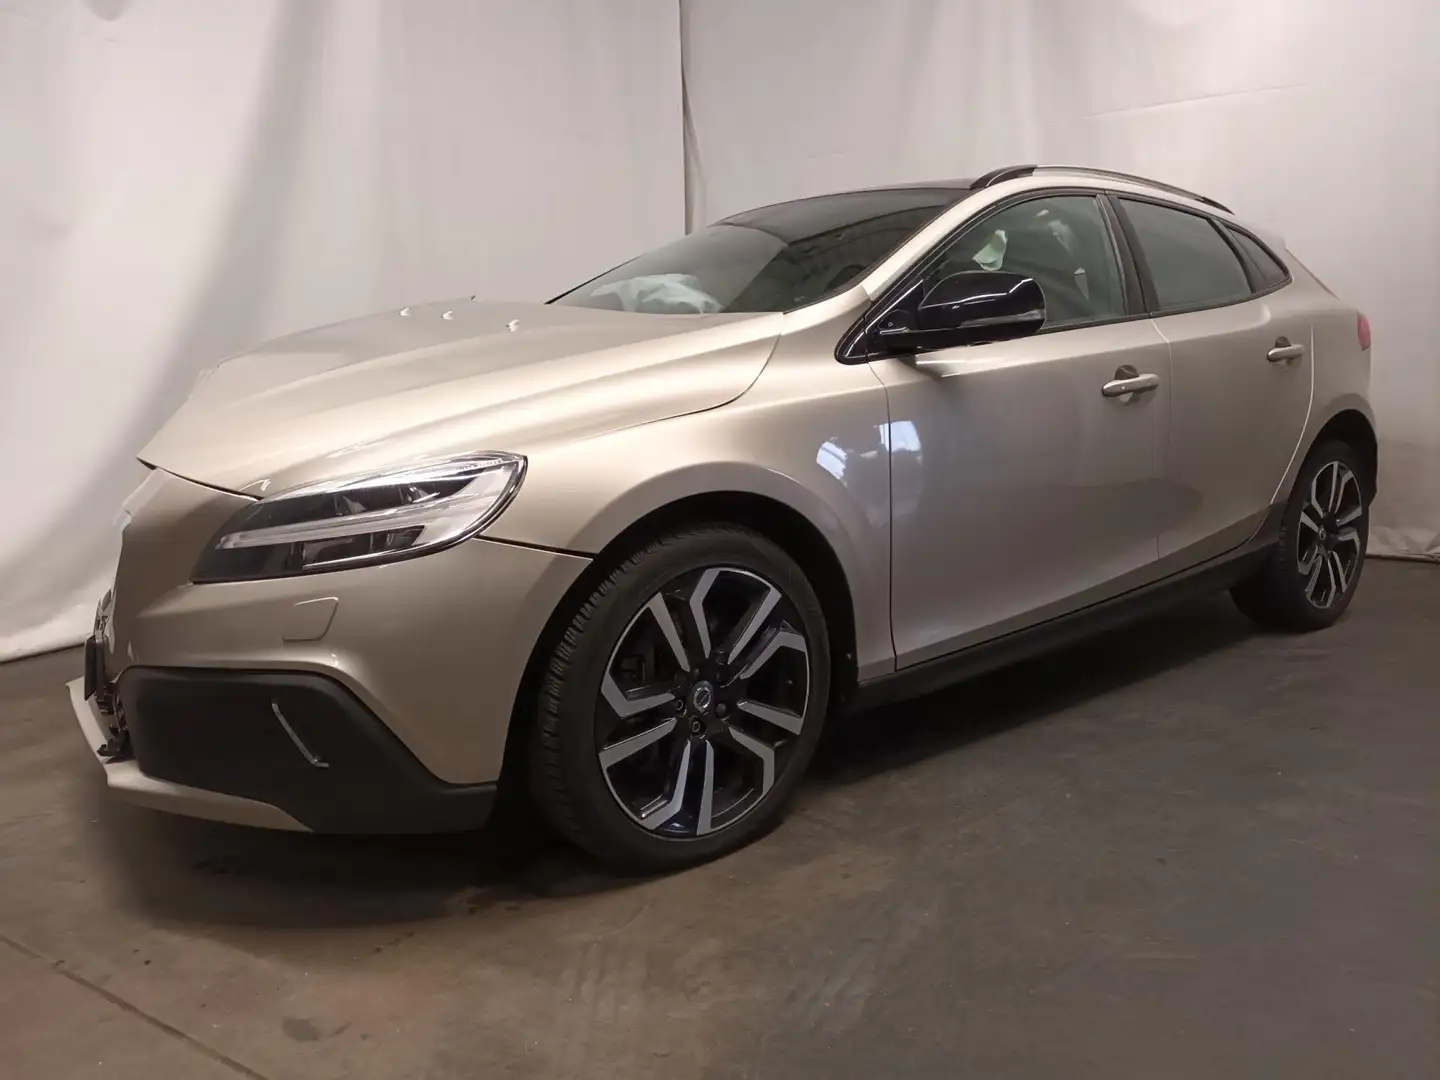 Volvo V40 Cross Country 1.5 T3 Nordic+ - Front Schade - Airbags Defect Braun - 2